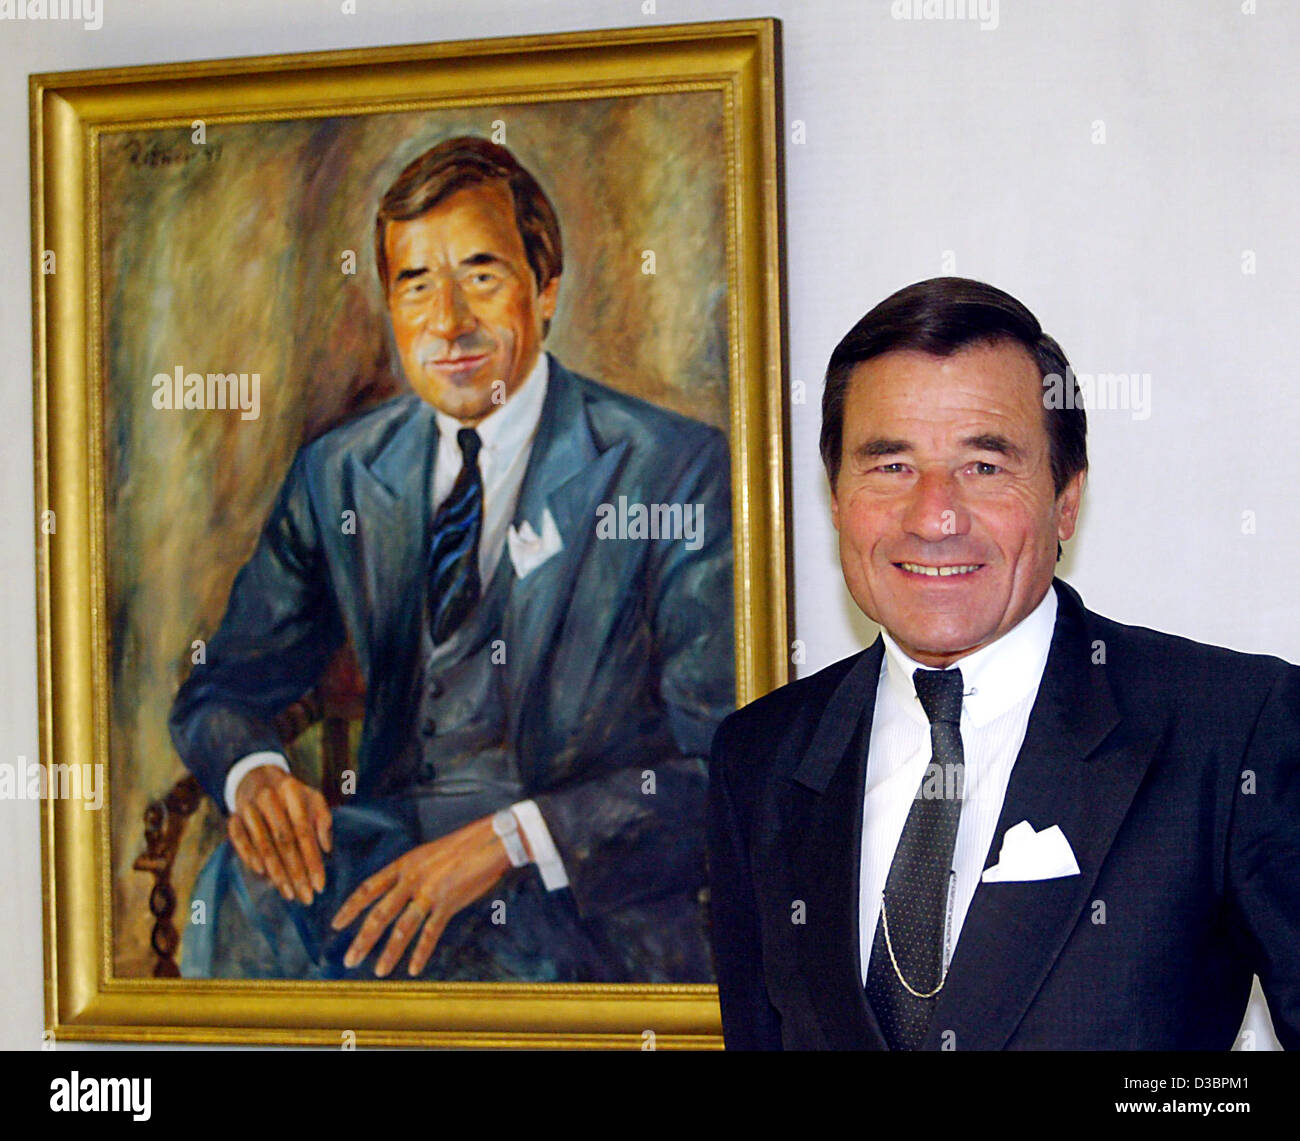 dpa) - Wolfgang Grupp, Executive Director of t-shirt and tennis clothing  producer Trigema, stands next to a painting featuring himself at the  company headquarters in Burladingen, Germany, 16 December 2004. Trigema  which